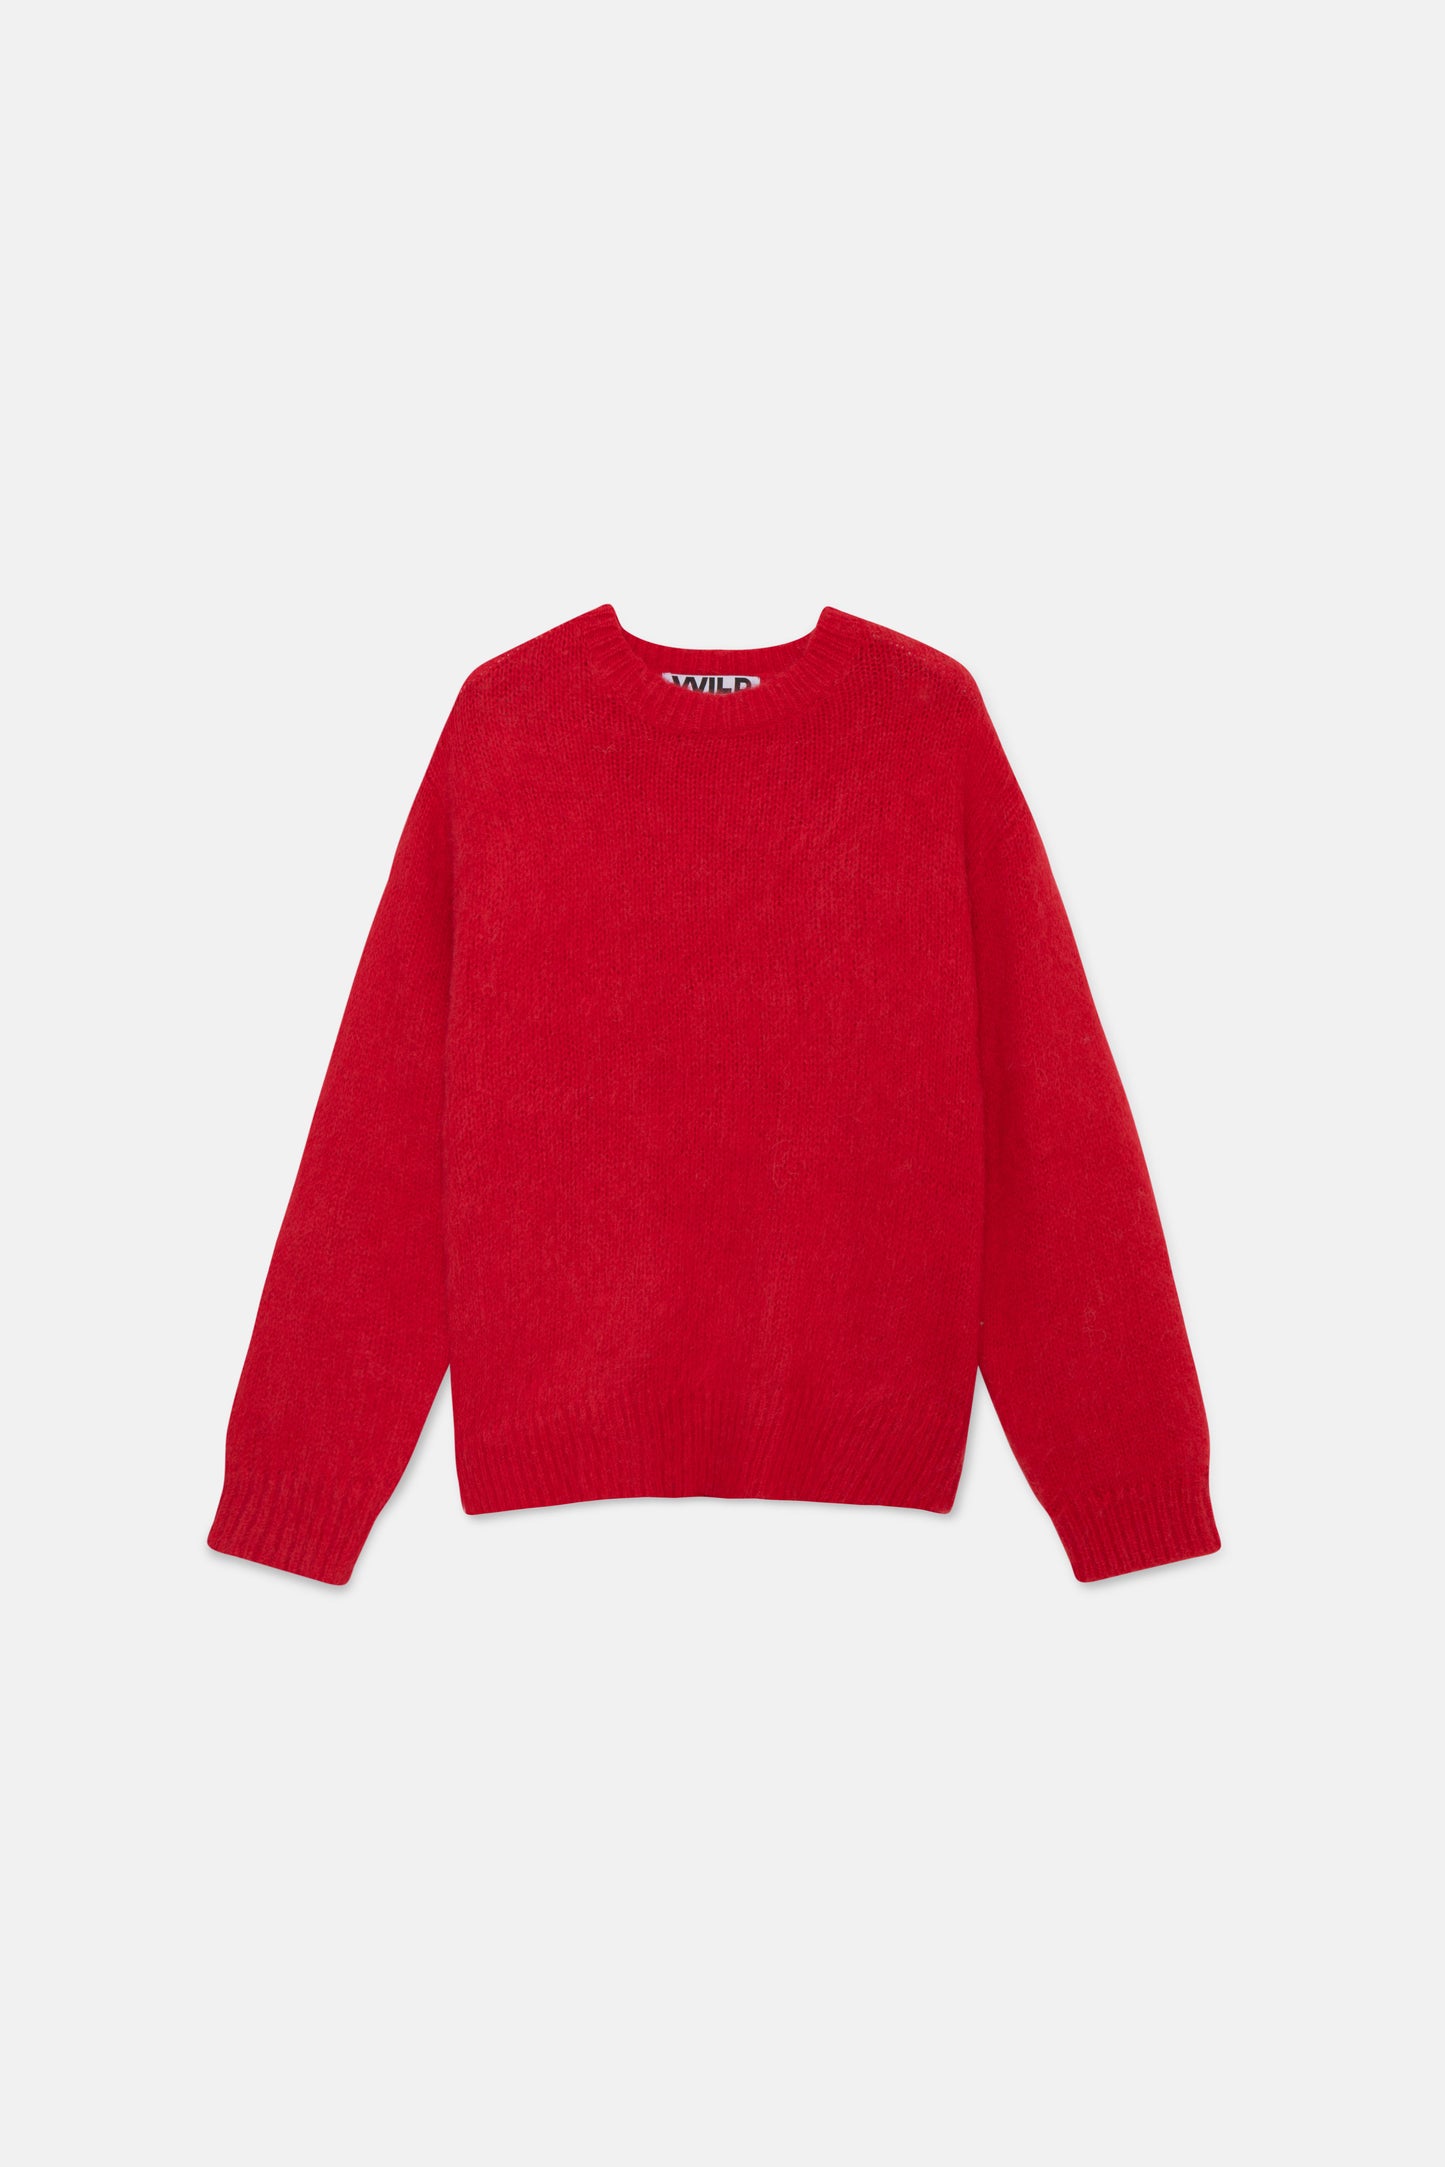 Red soft knit sweater